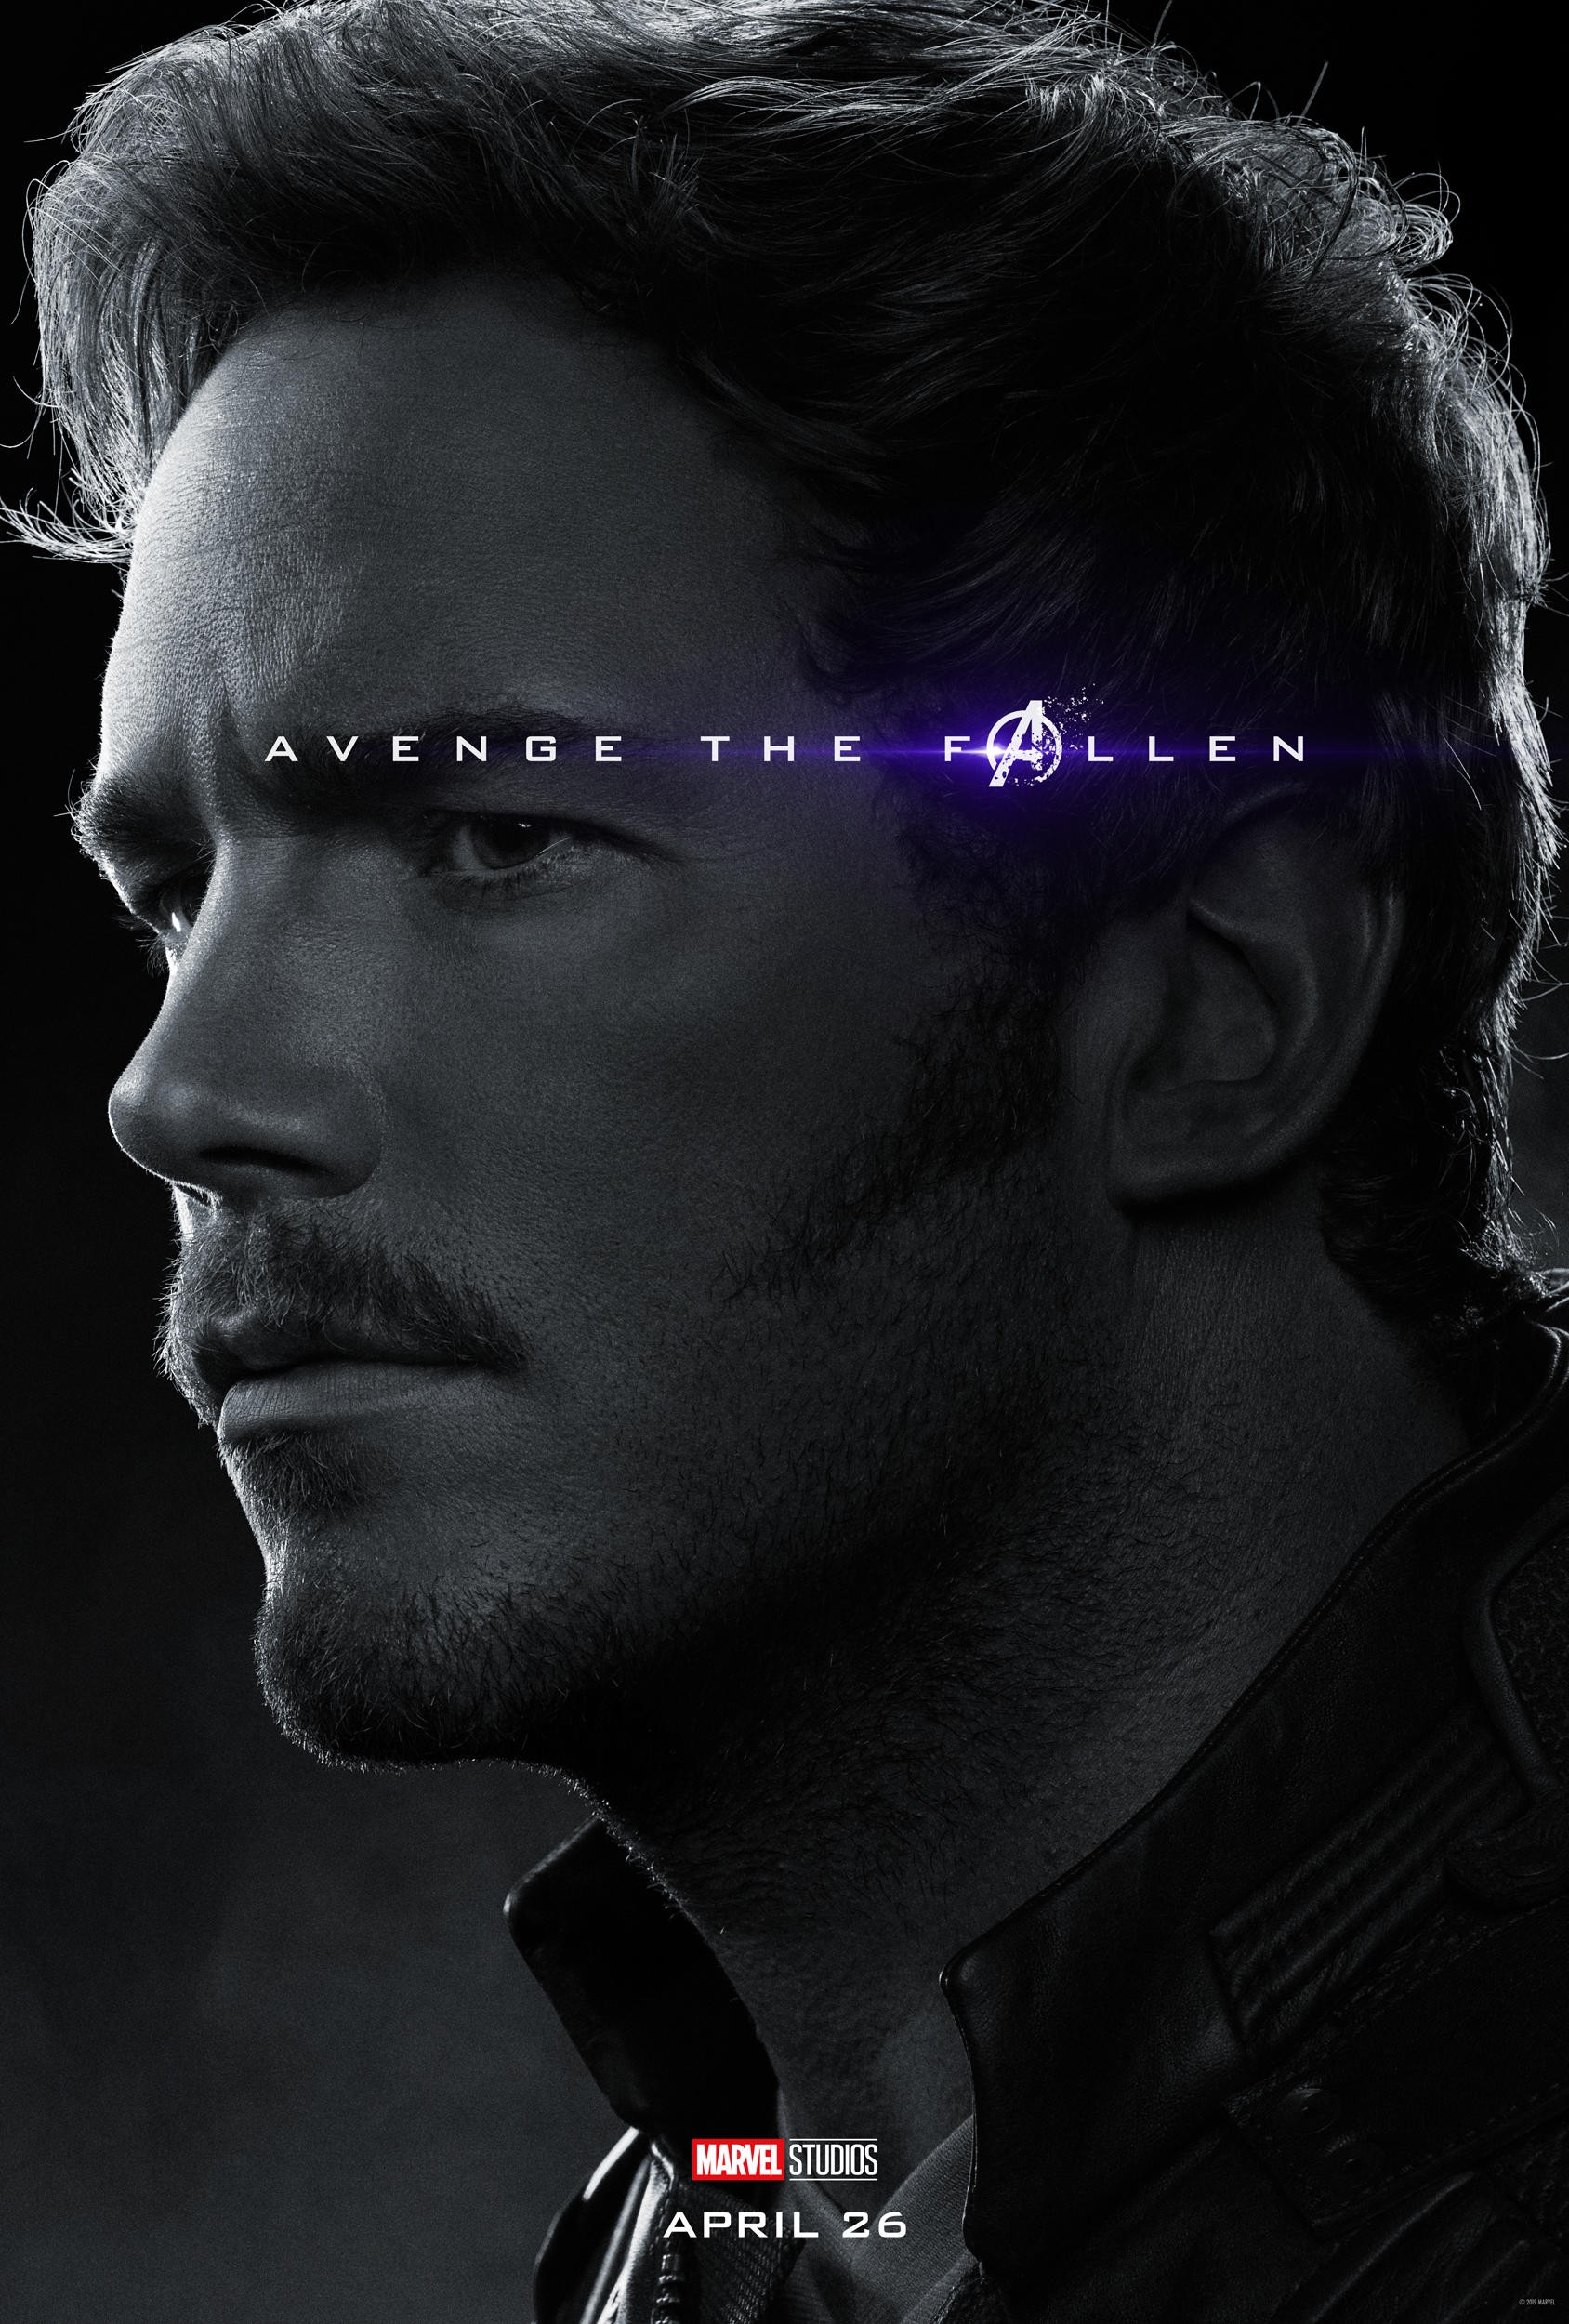 Production of Avengers: Infinity War and Avengers: Endgame - Wikipedia